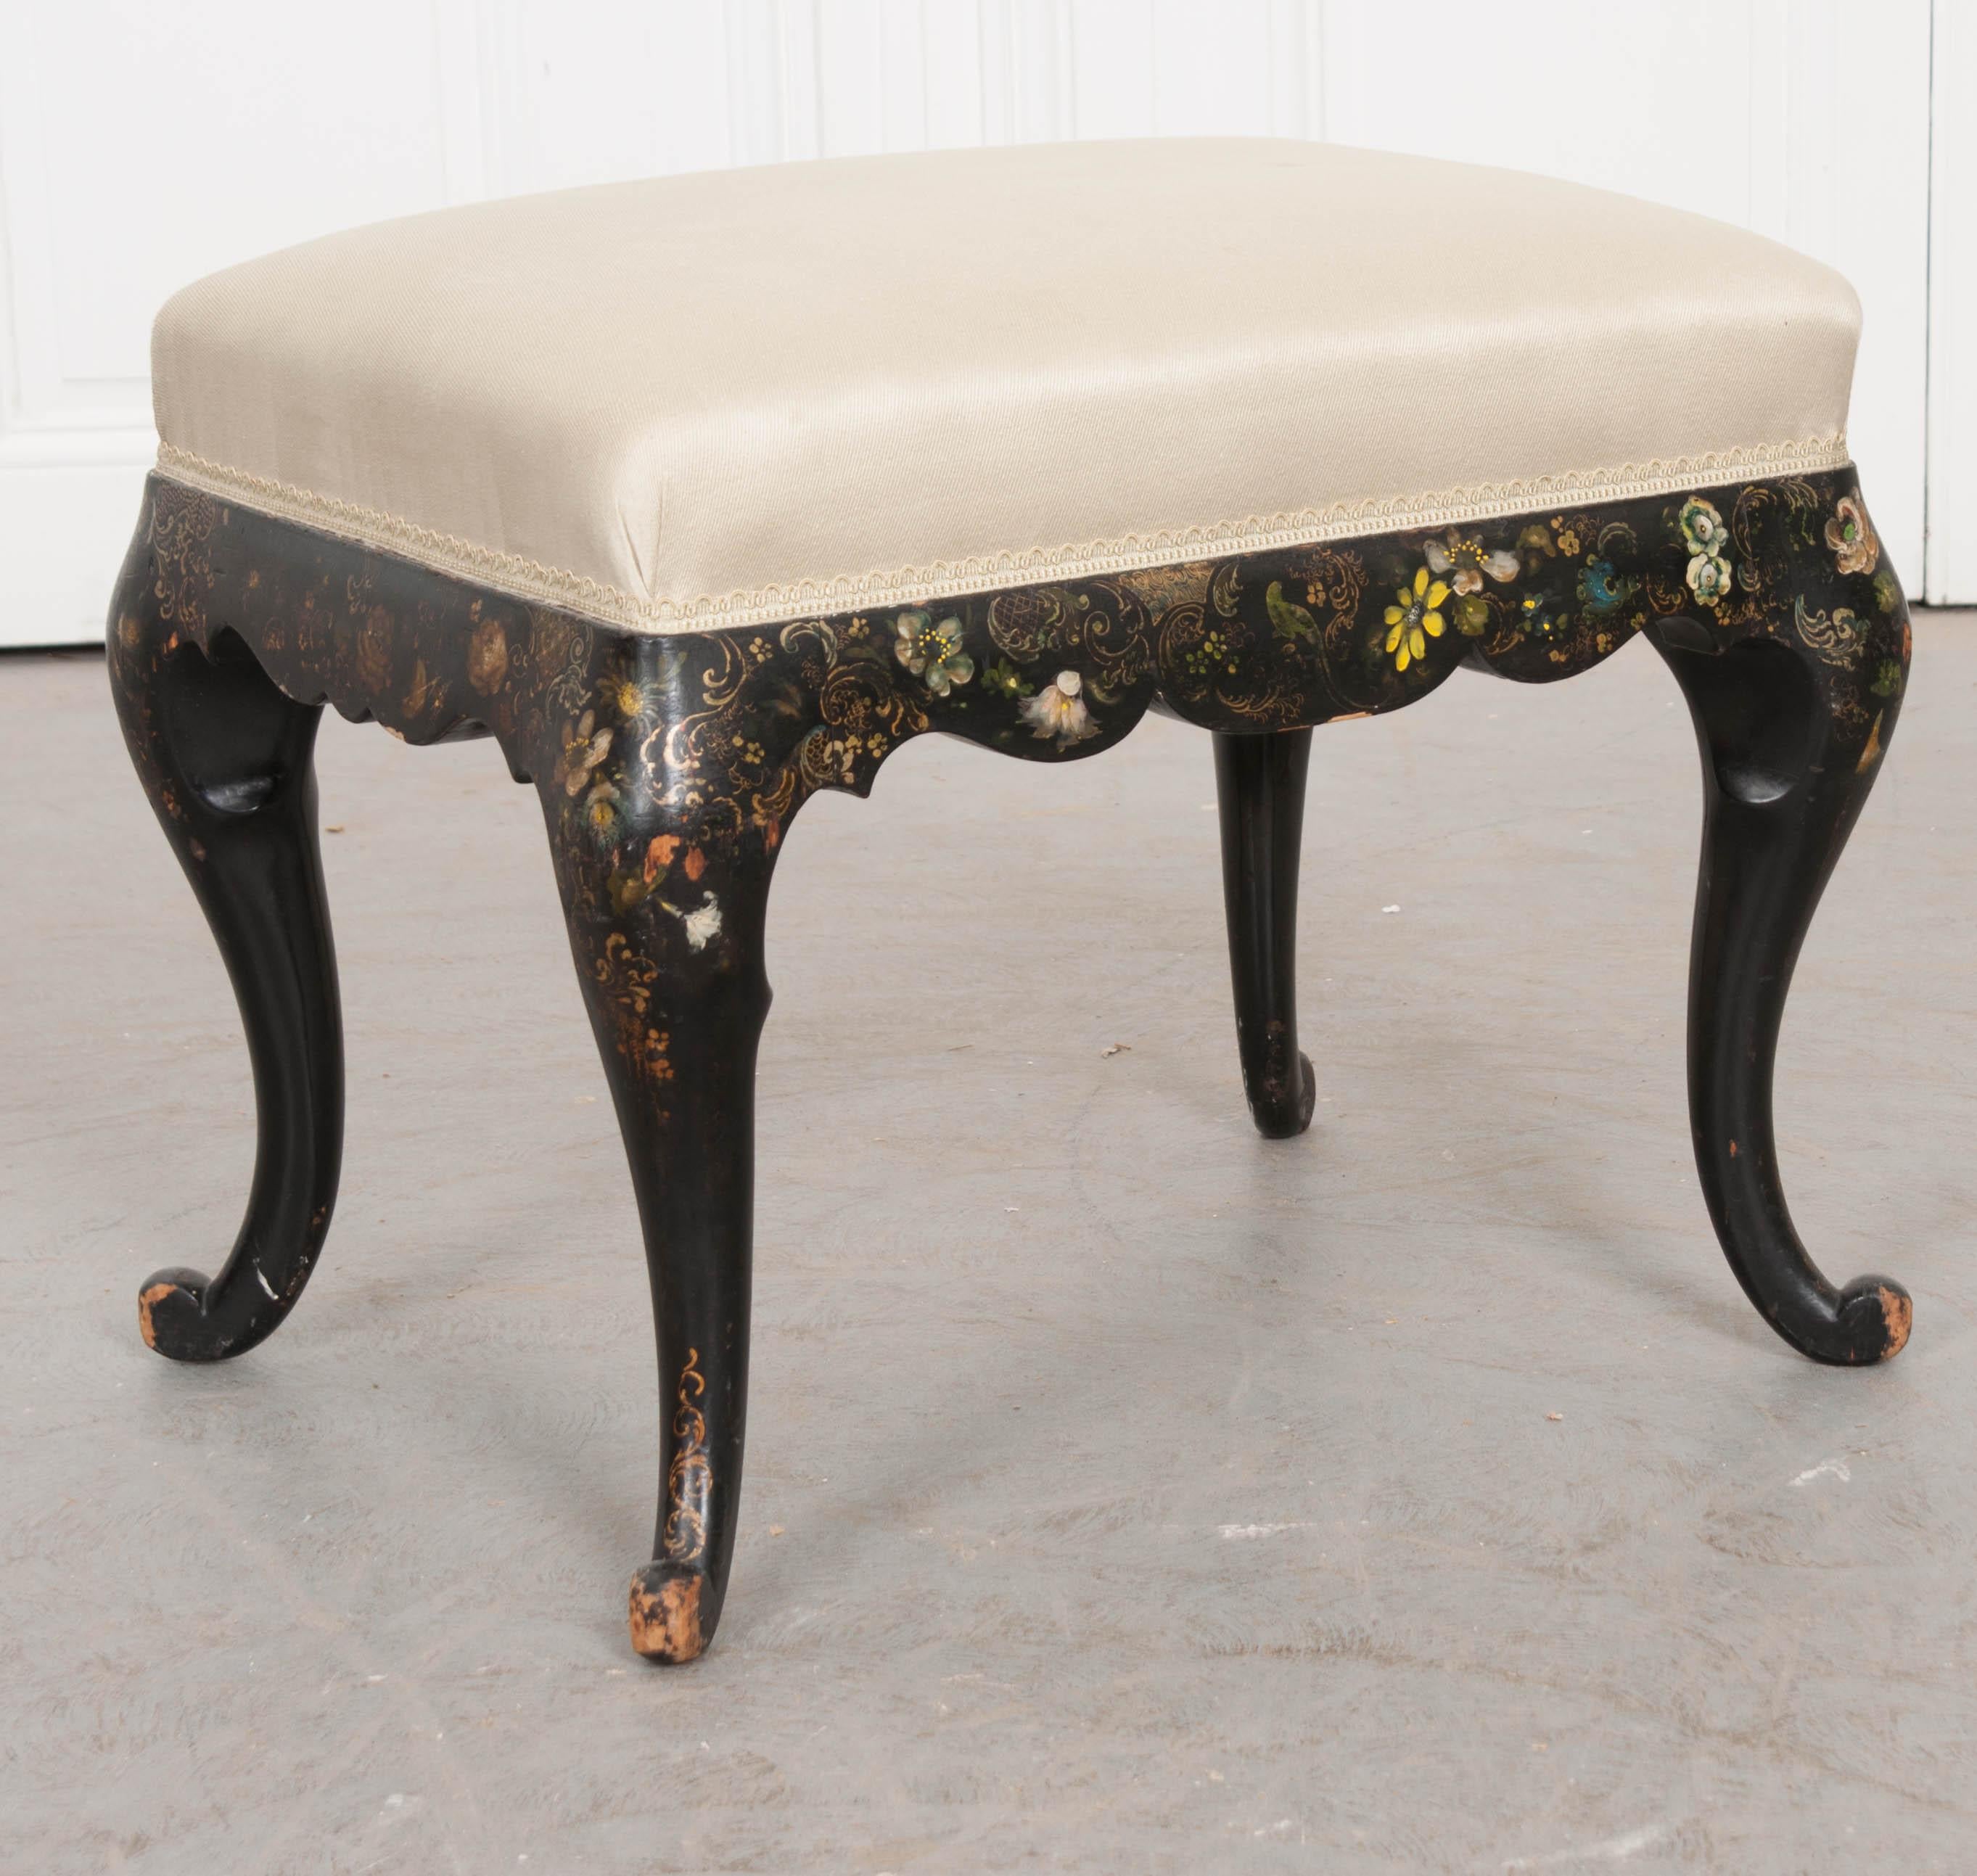 Silk Early-20th Century English Chinoiserie Hand-Painted and Cabriole Leg Stool For Sale